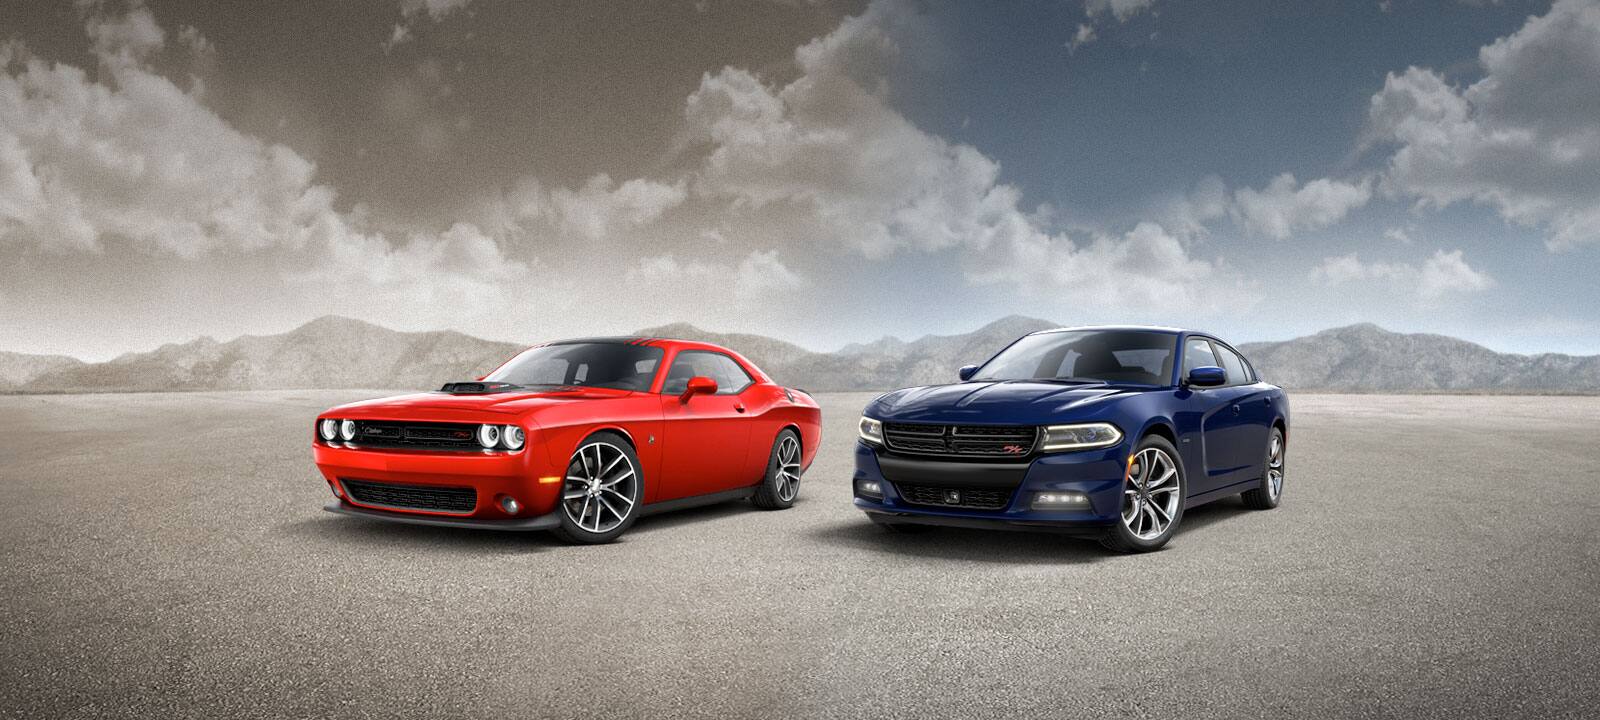 Dodge Official Site Explore the American Muscle Car Lineup